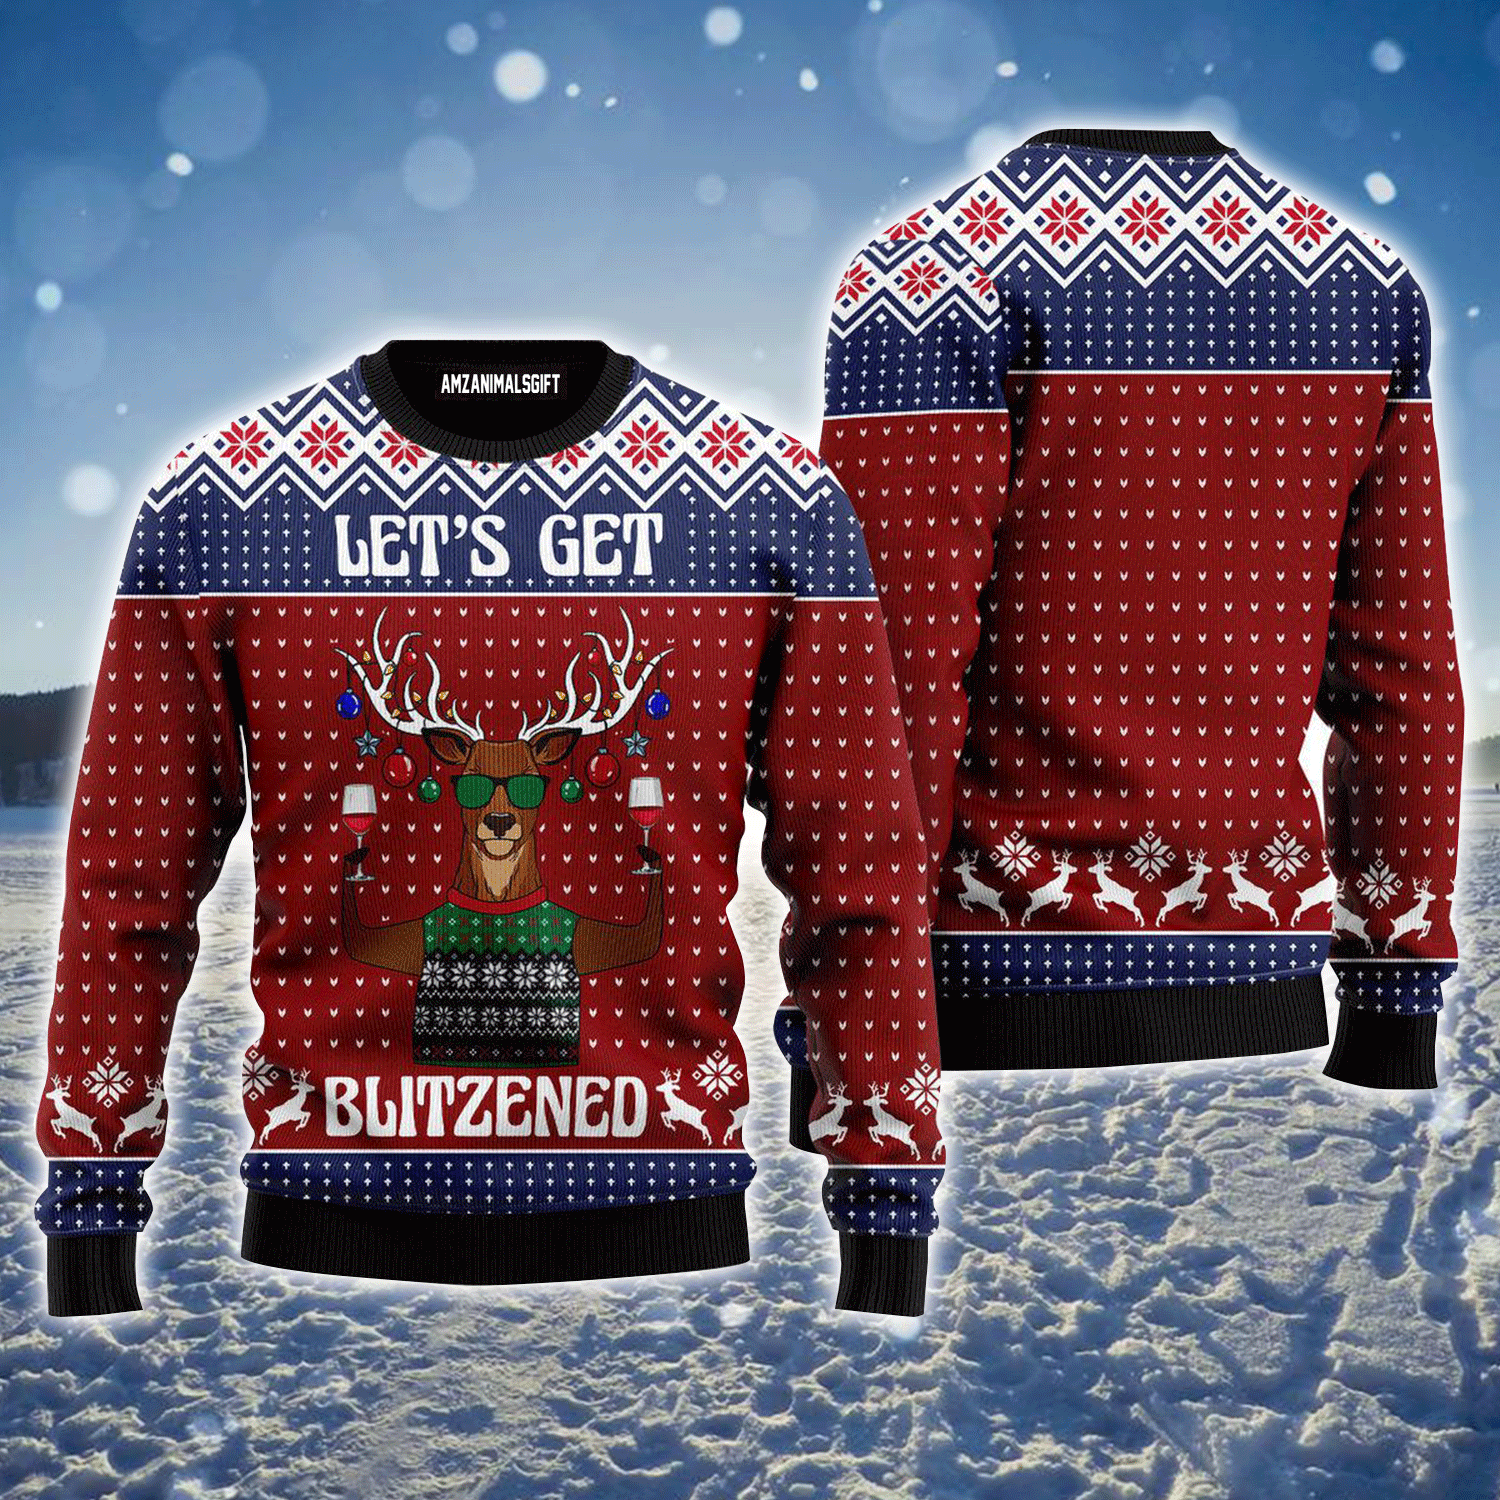 Reindeer Ugly Sweater, Lets Get Blitzened Ugly Sweater, Funny Reindeer Pattern Brown Sweater For Men & Women, Perfect Gift For Christmas, Friends, Family